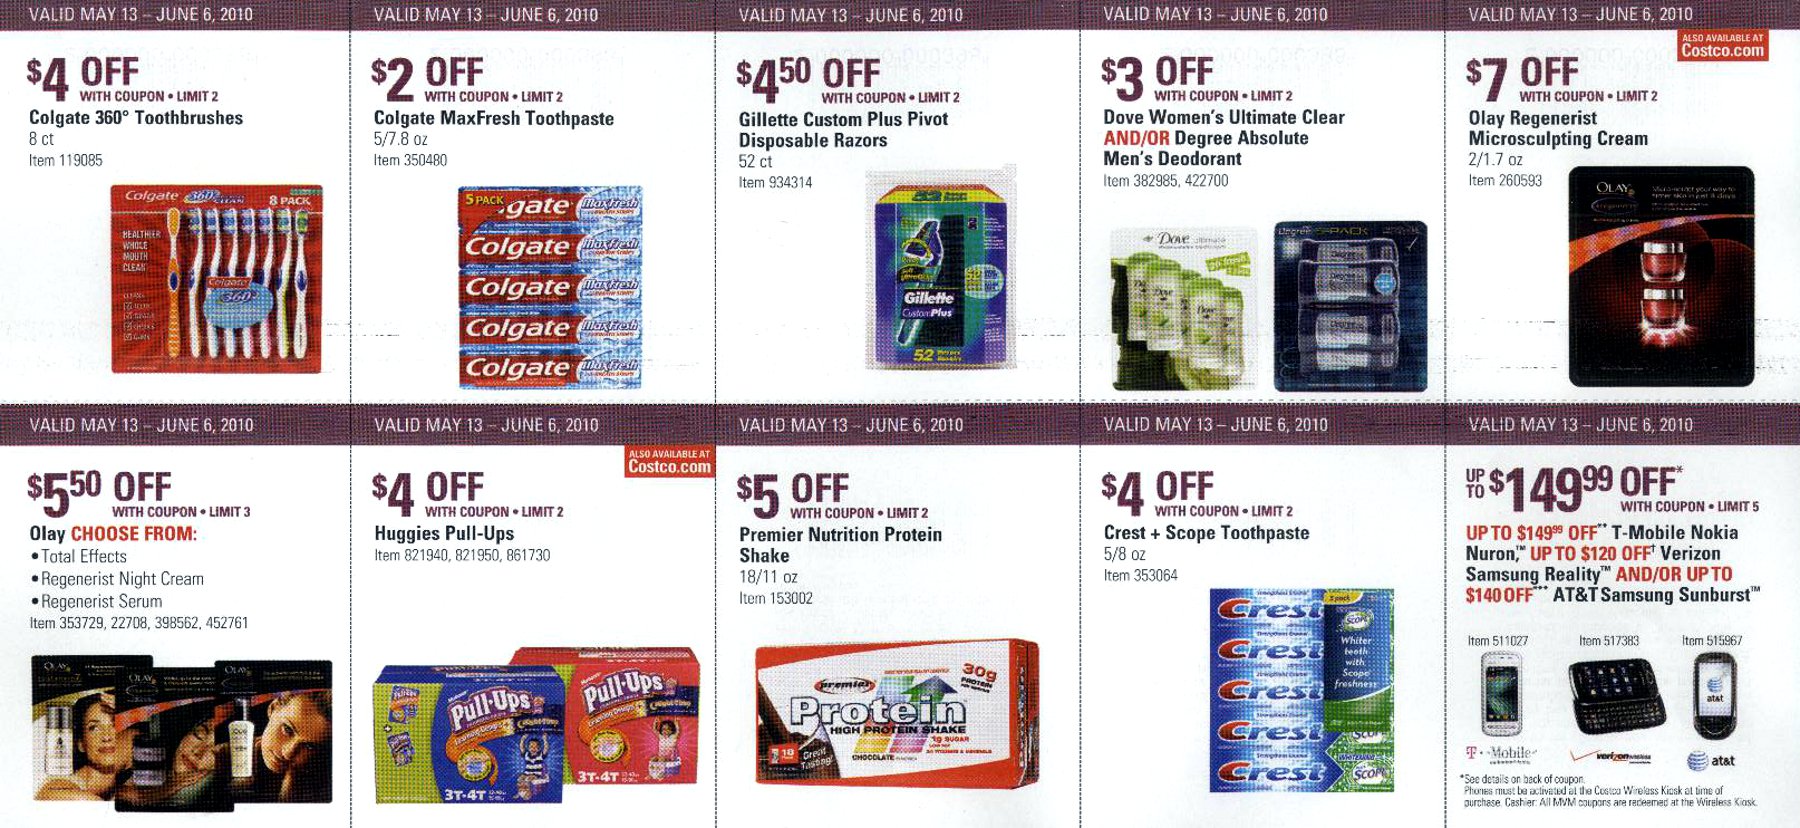 Coupon book full size page ->6<-